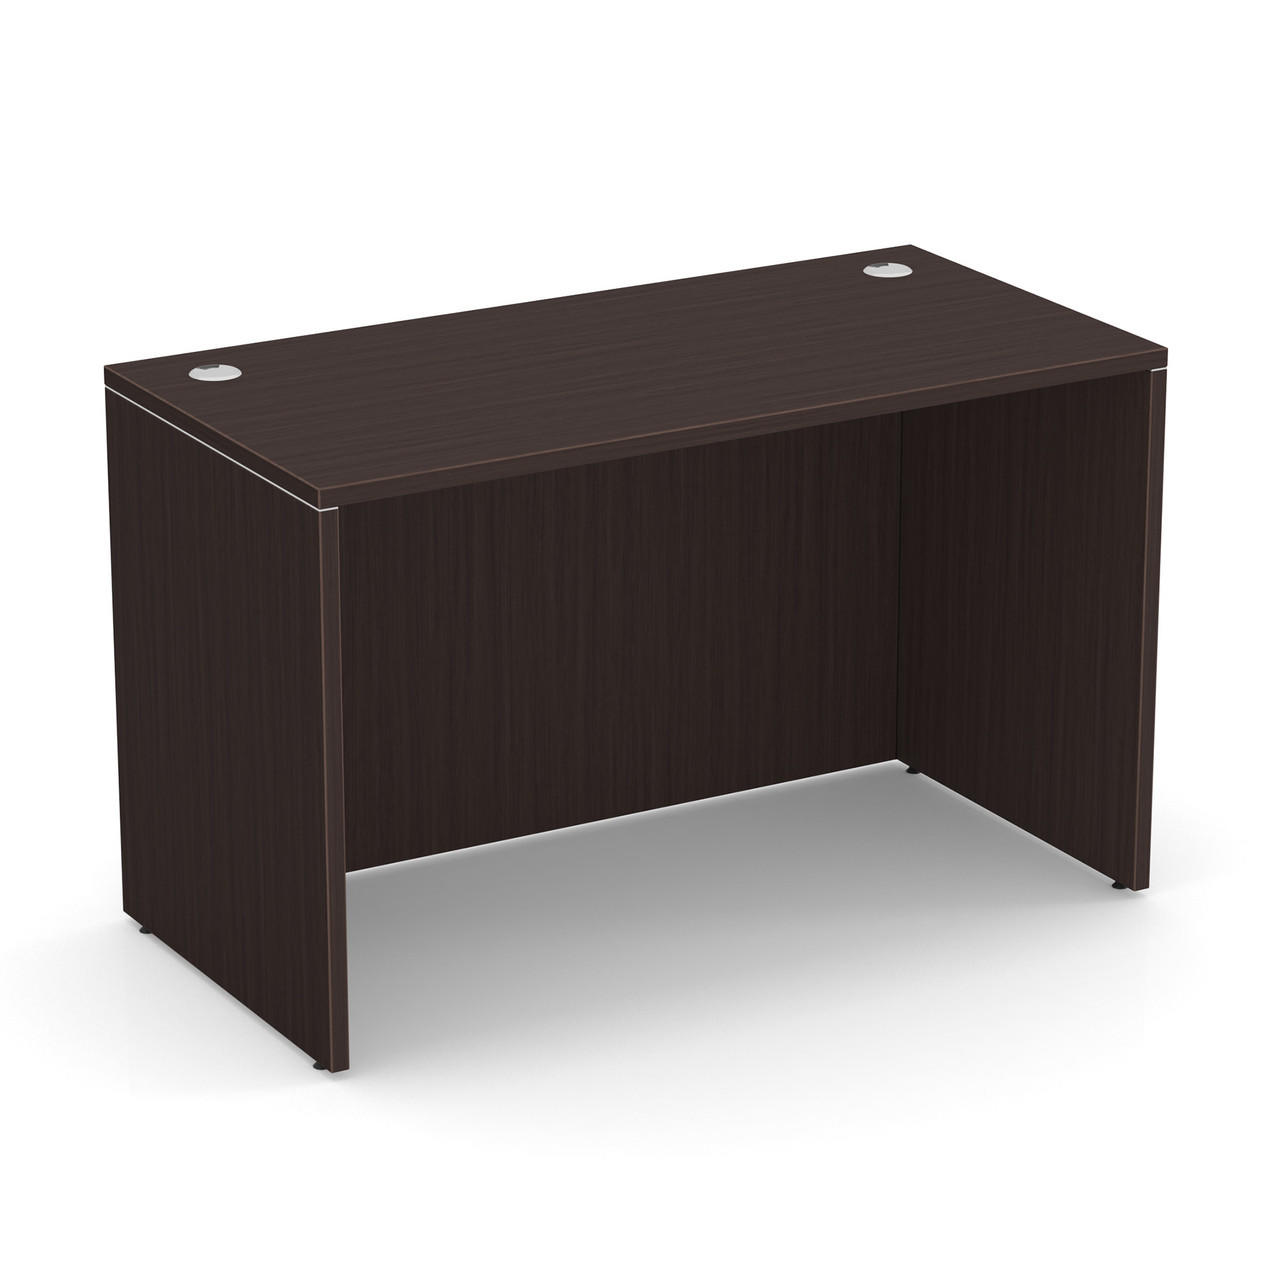  Office Source OS Laminate 71"W x 24"D Open Credenza Shell PL143 